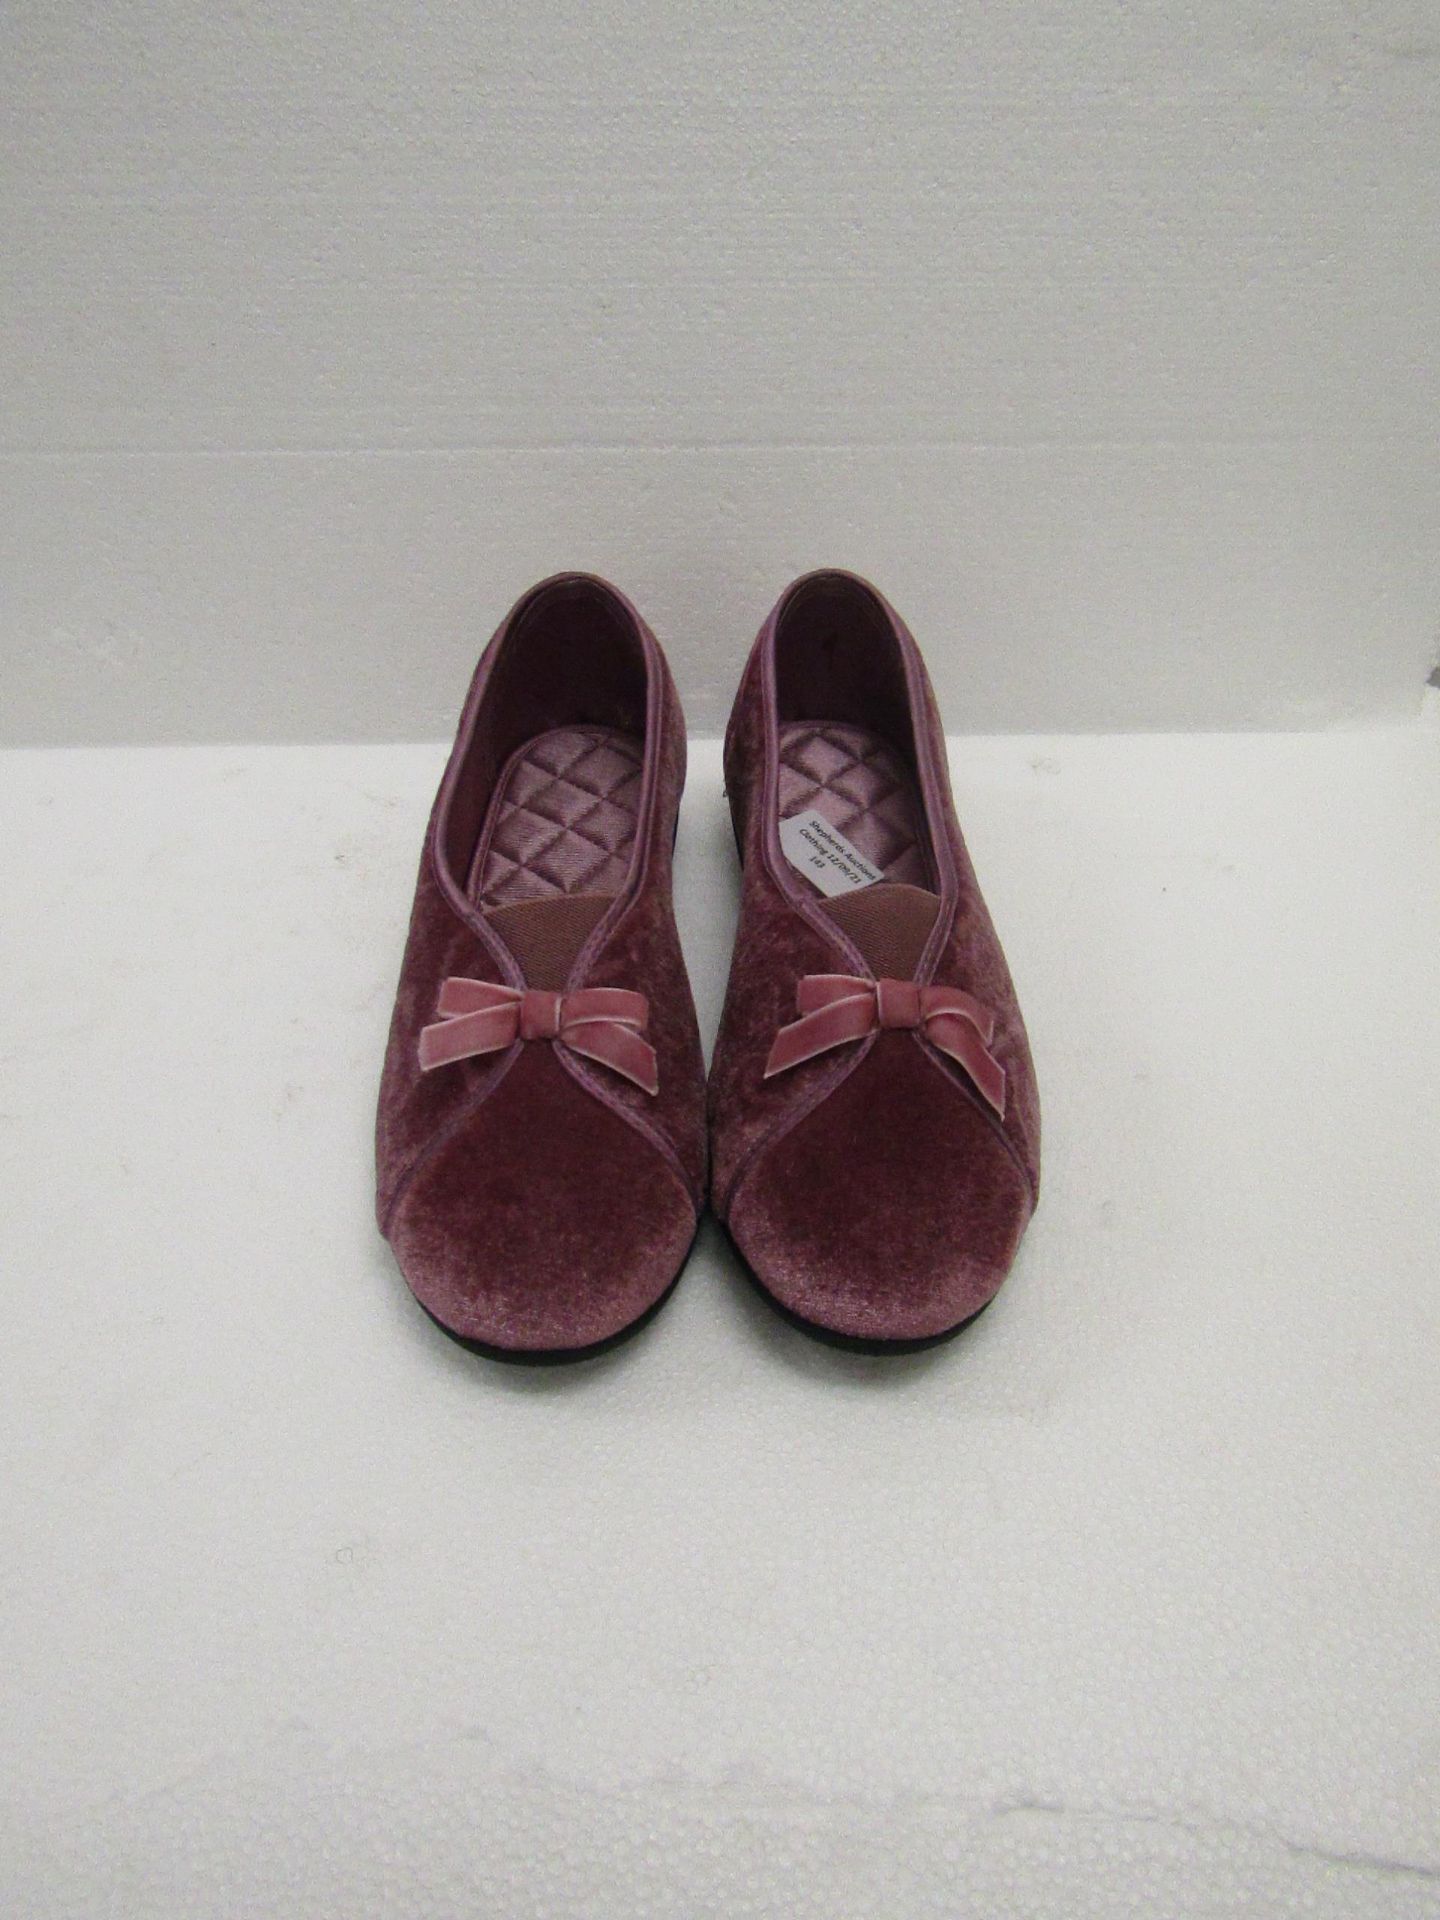 1 x Pair of Heavenly Soles Ladies Slippers, size 4, new